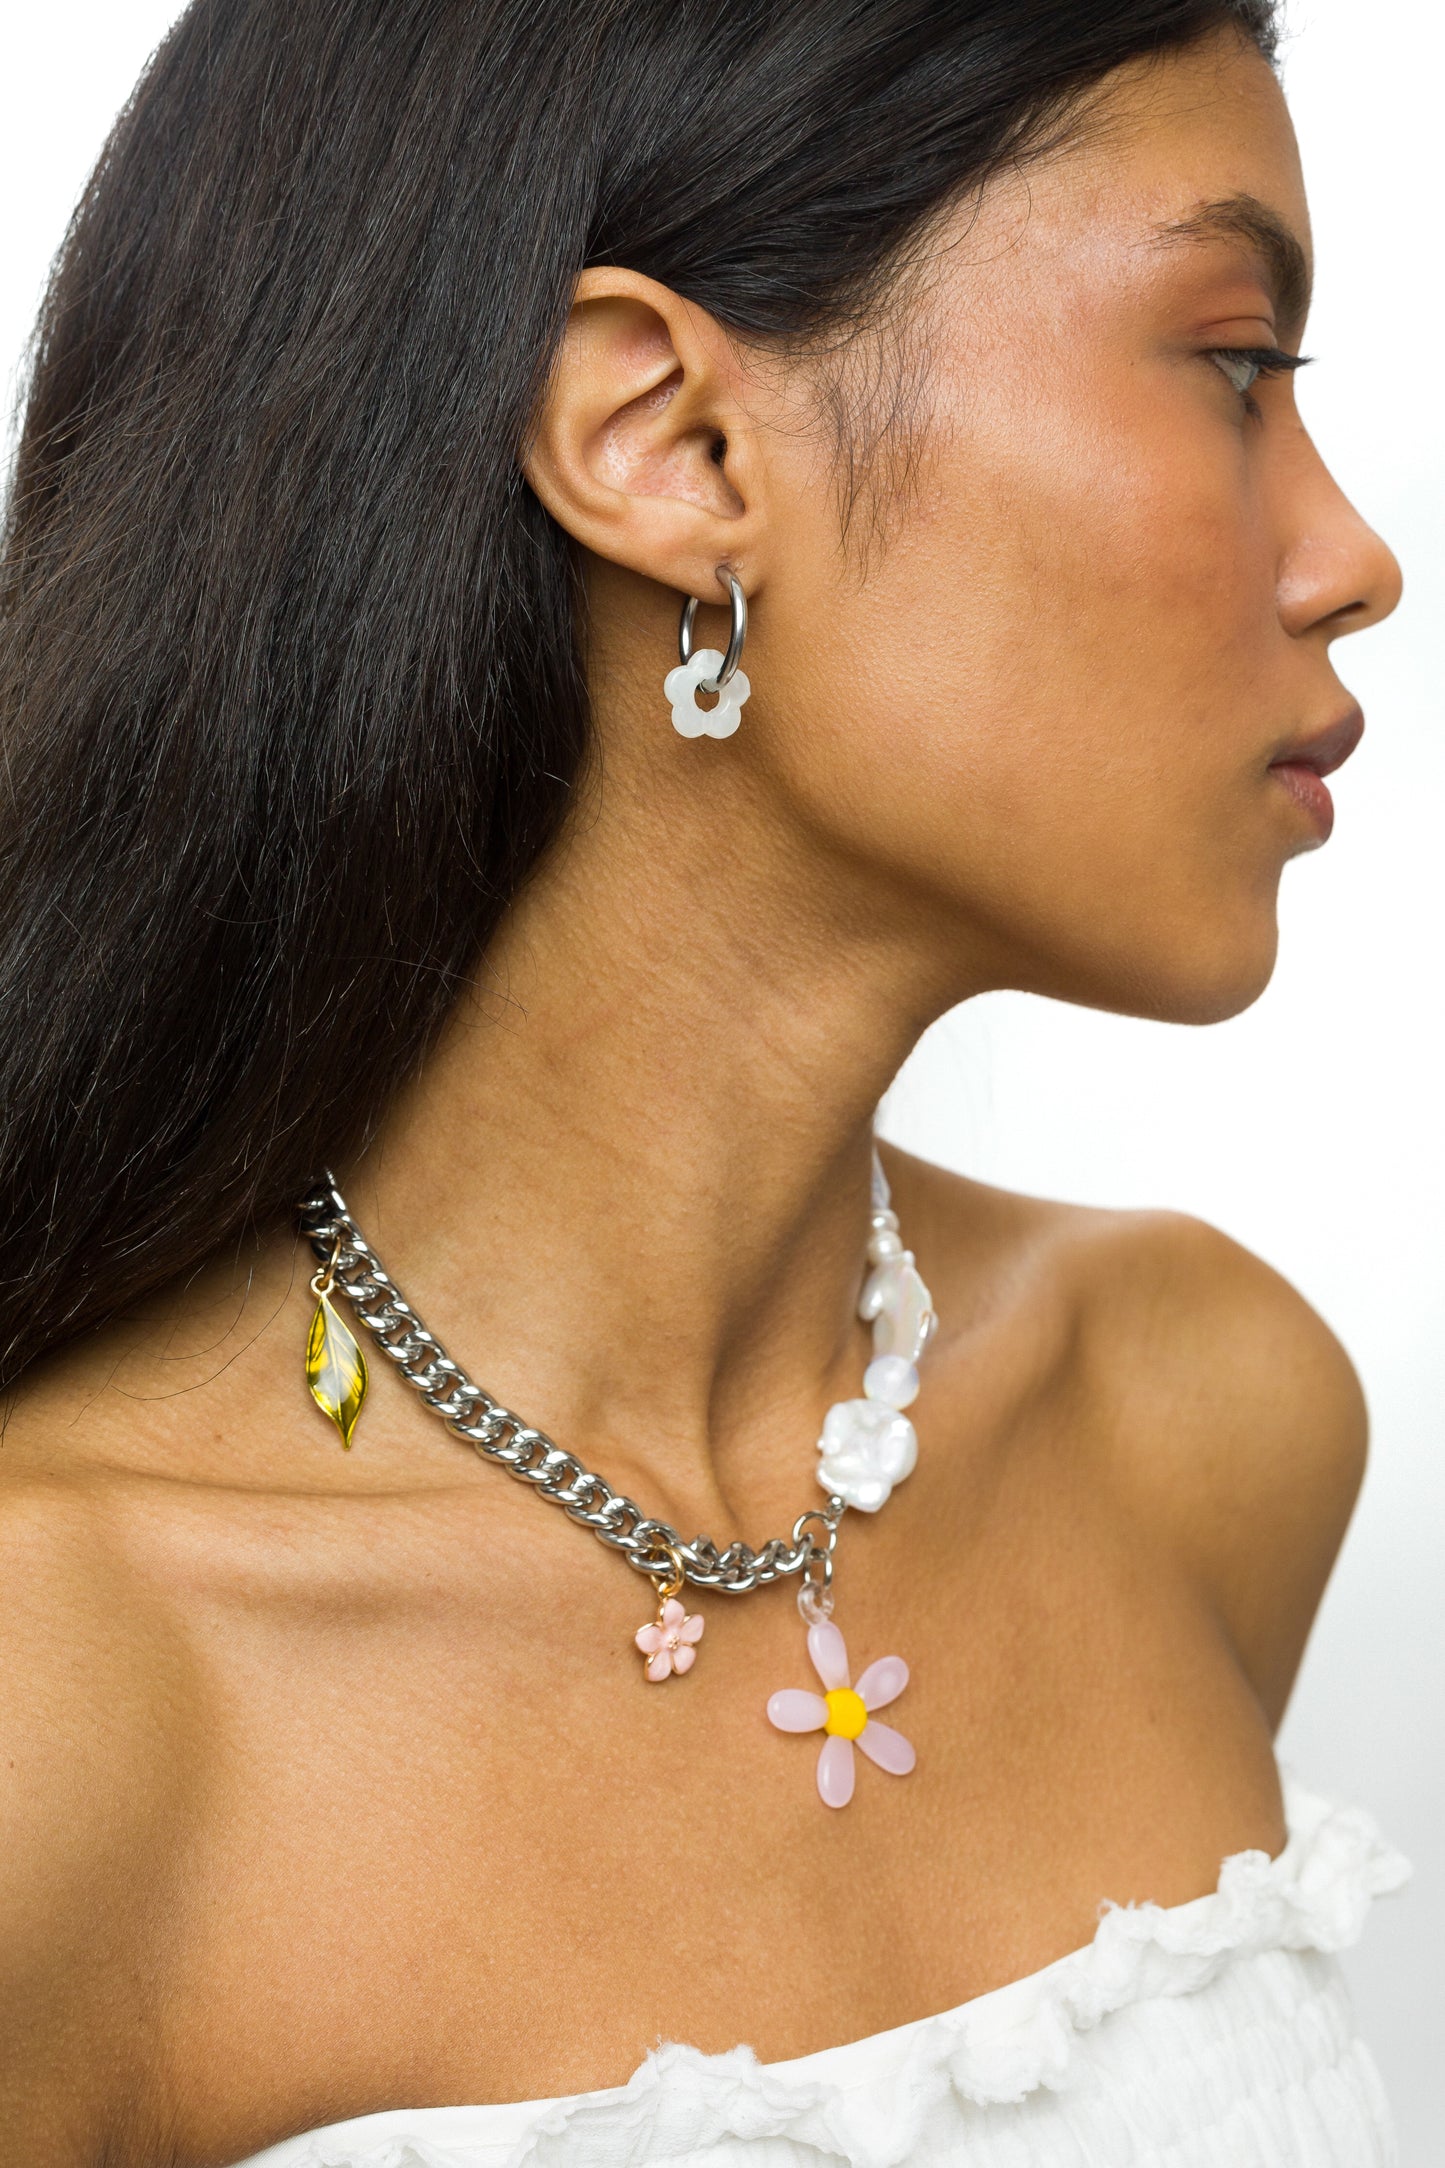 NECKLACE "BLOOMING"